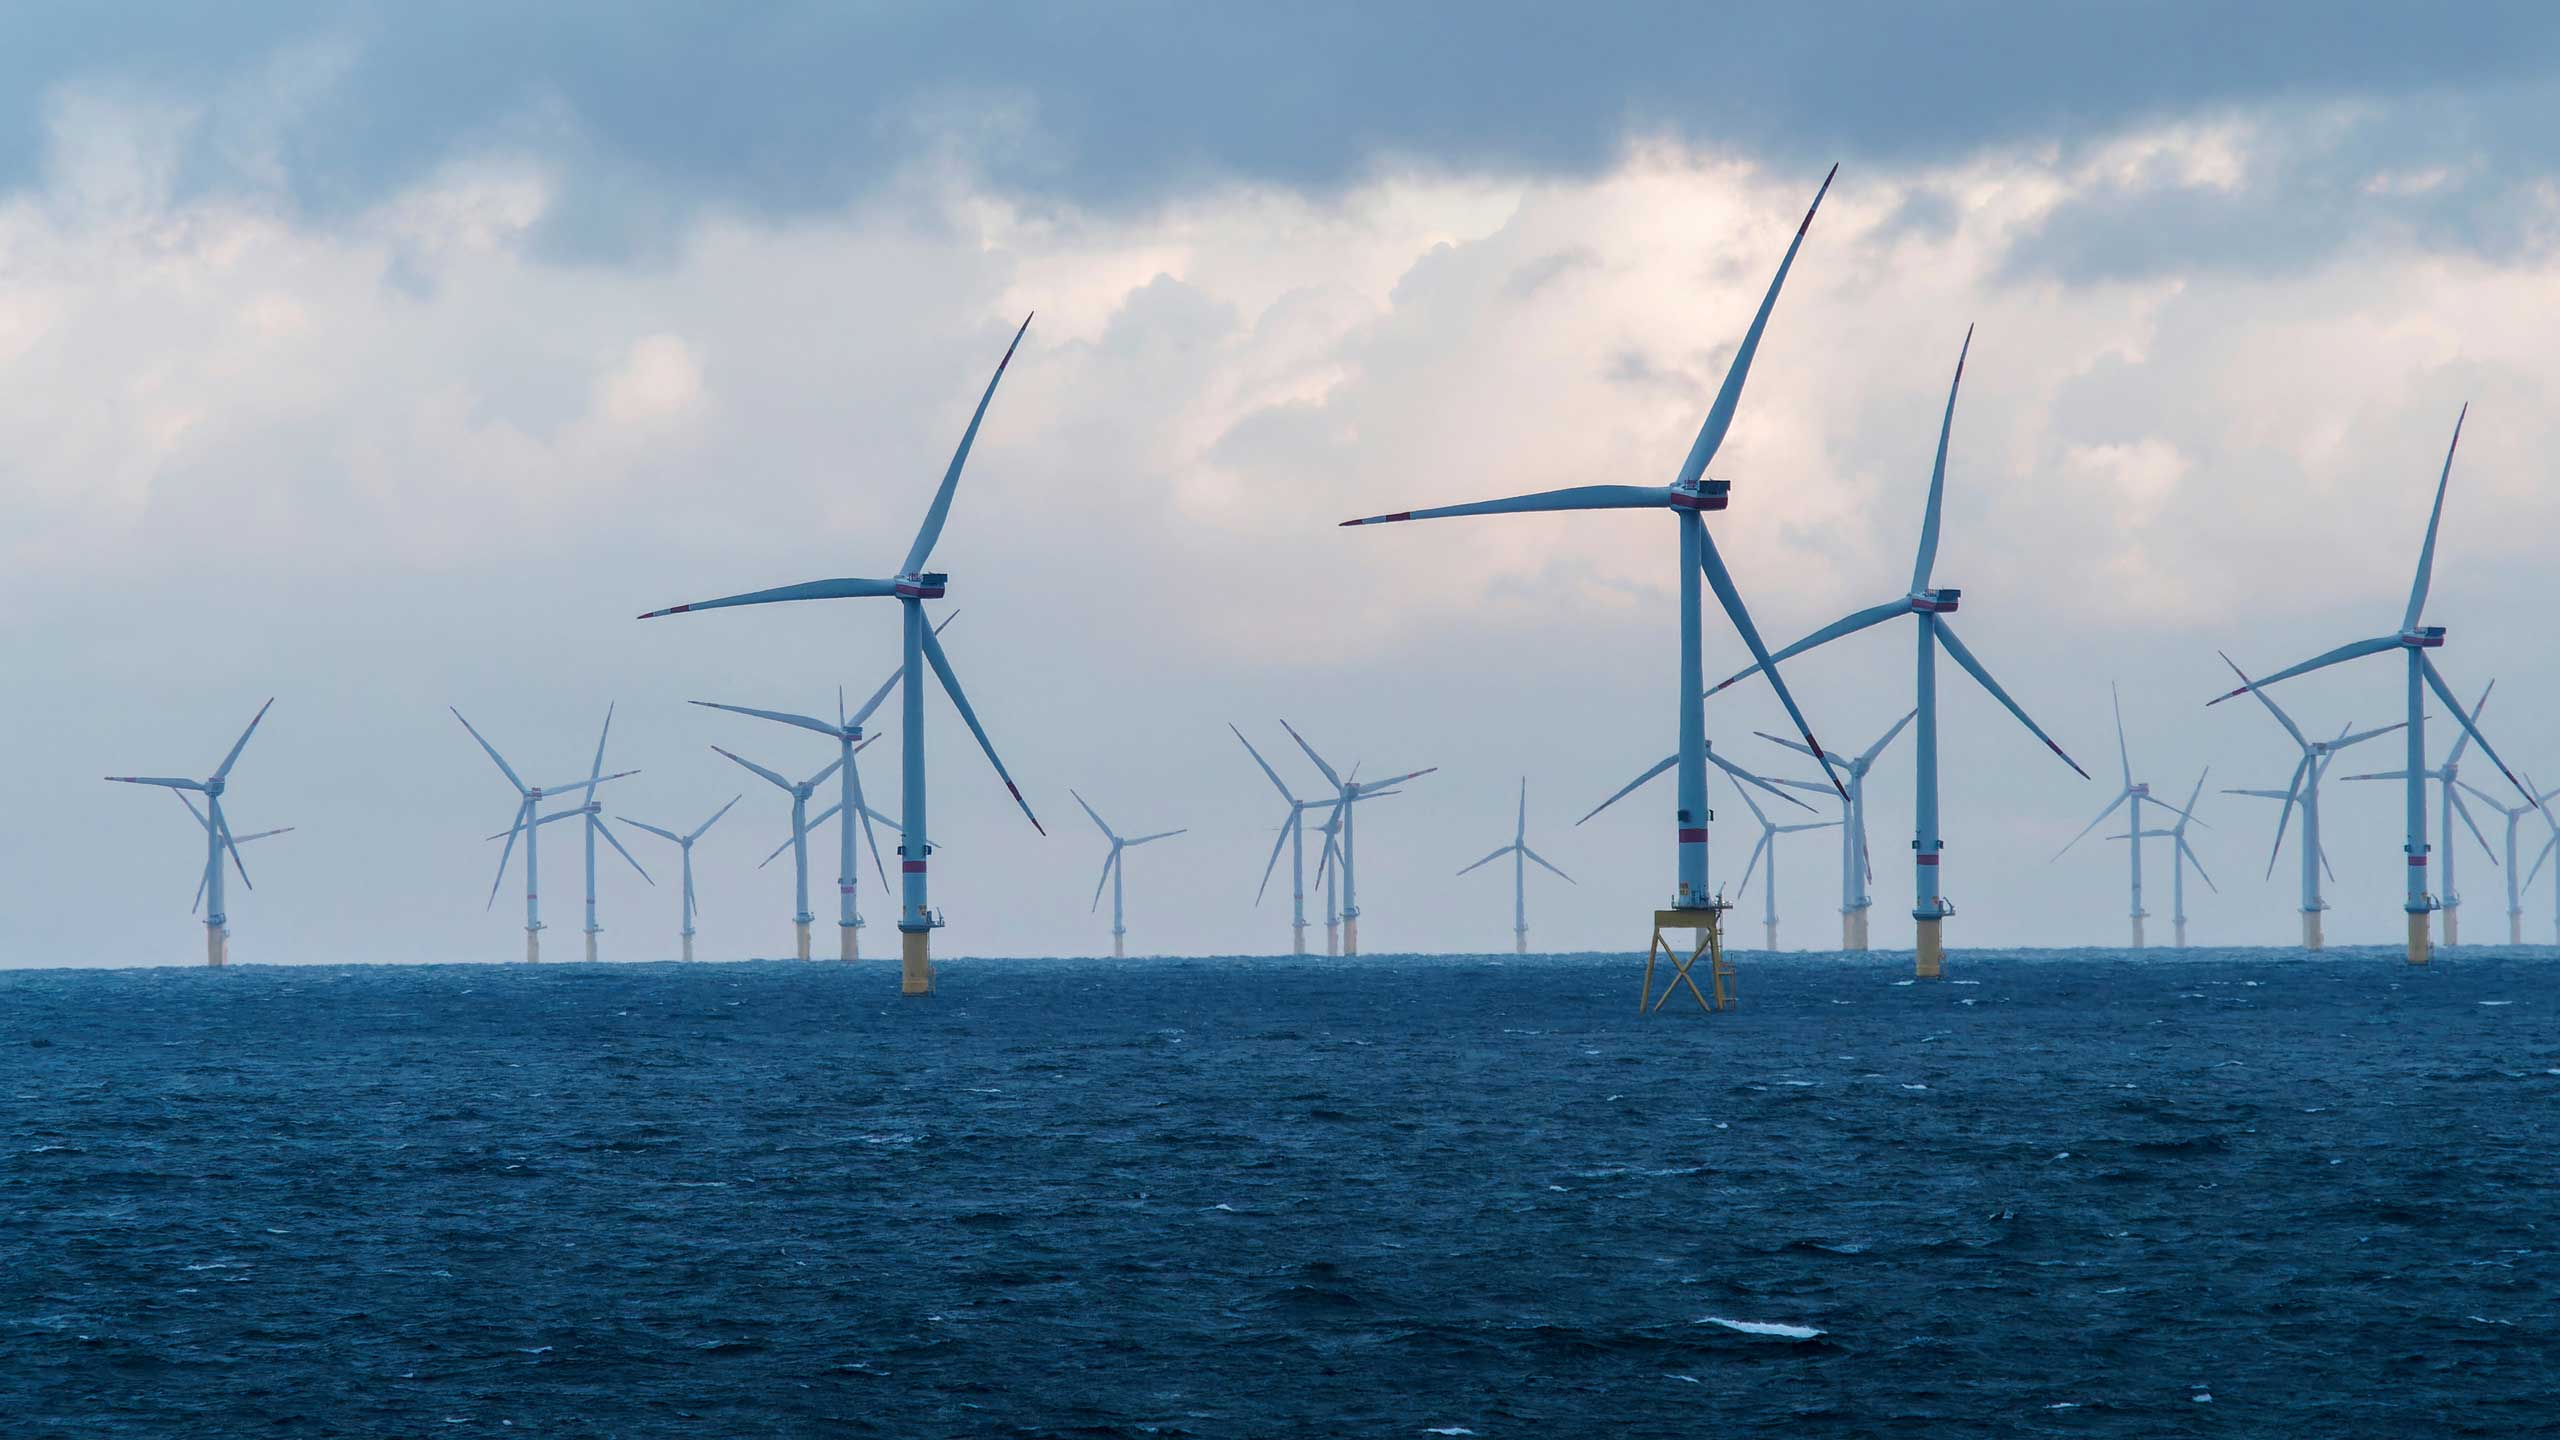 OWC supports Dutch authorities for wind farm tenders